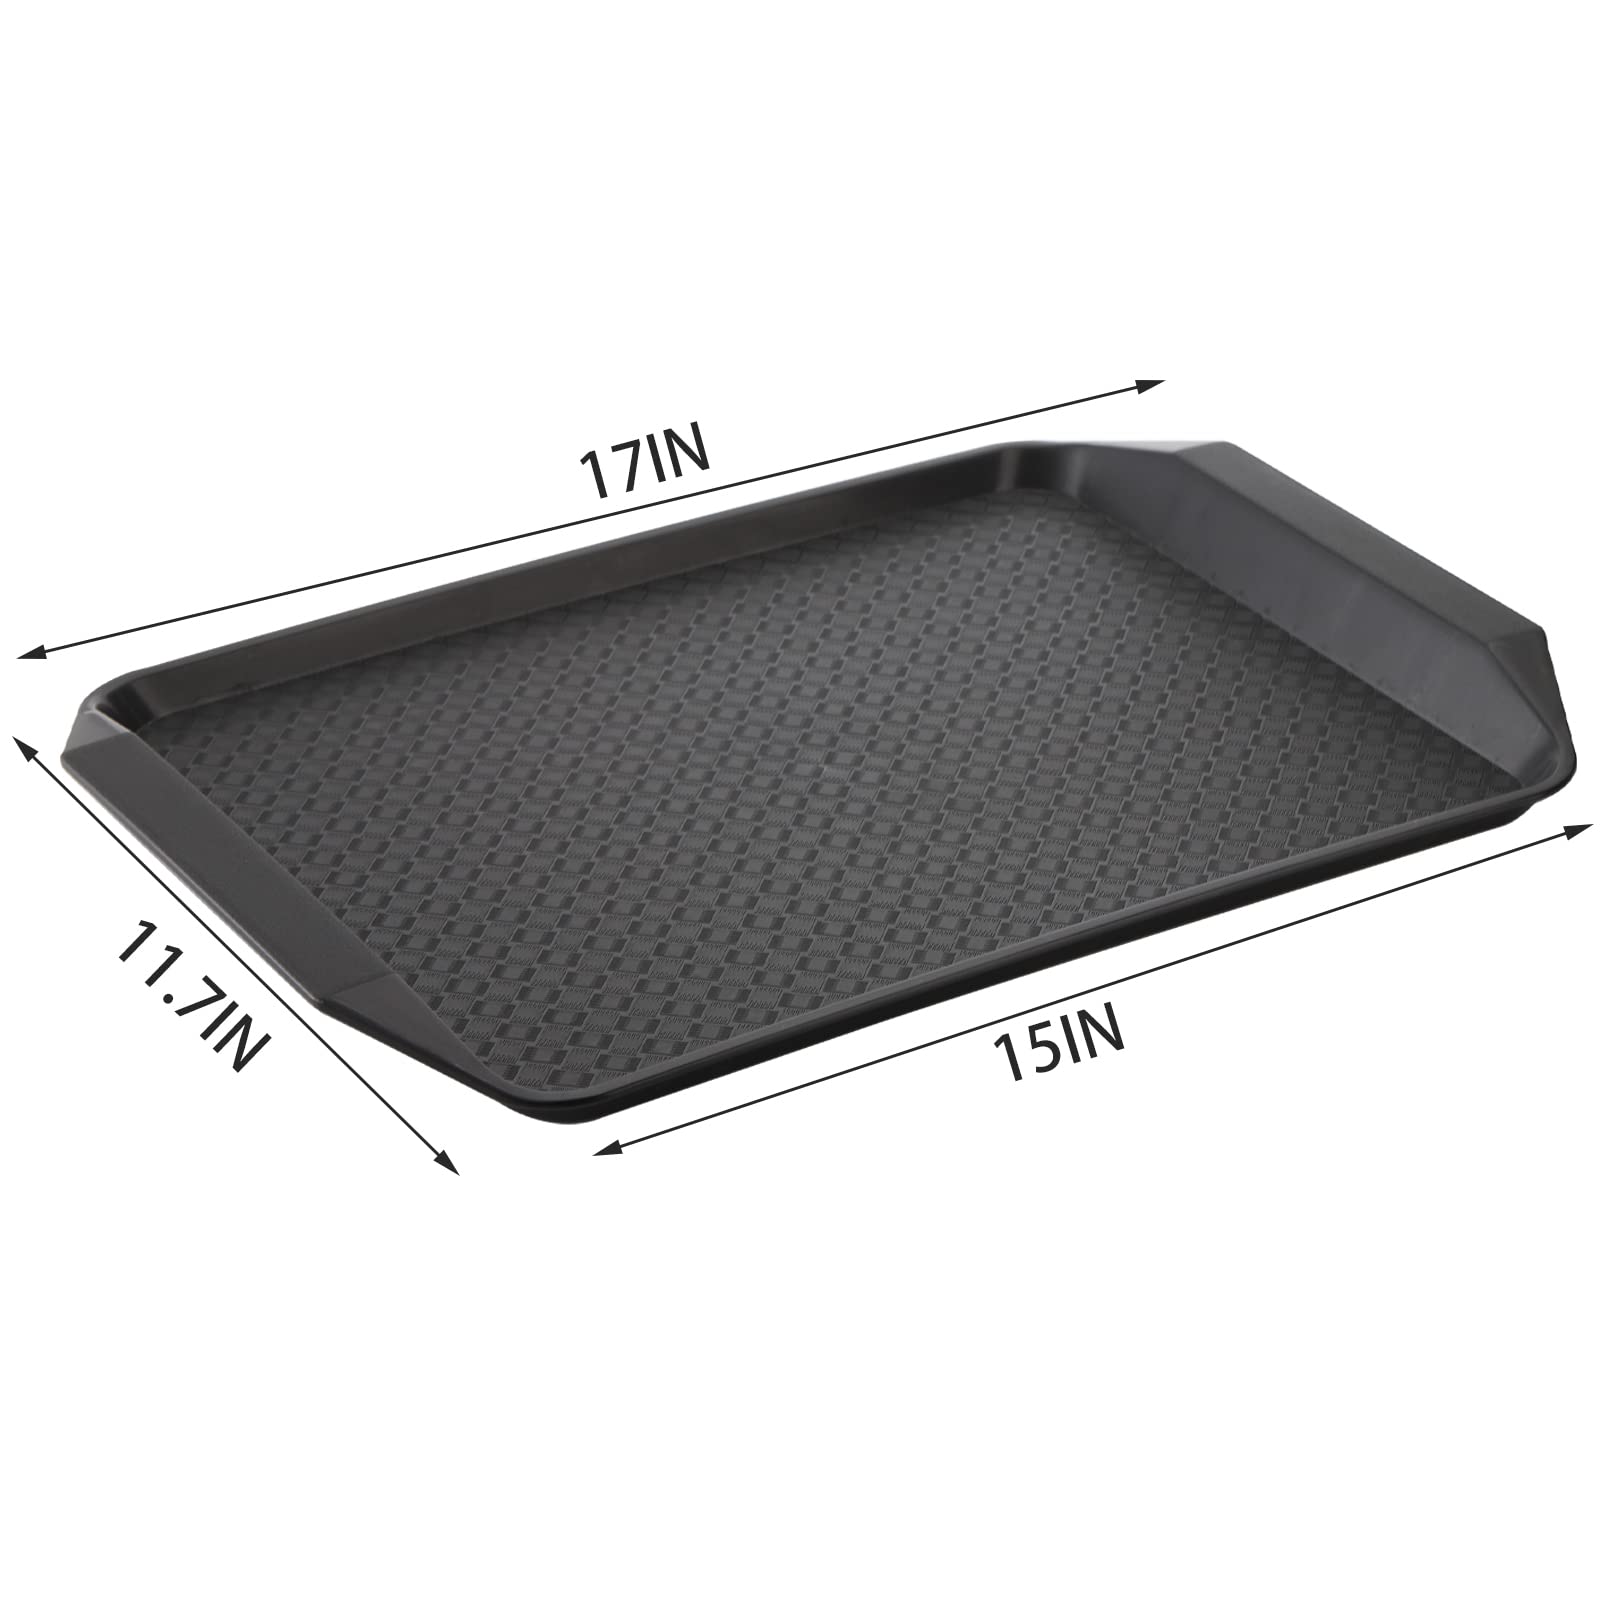 Cedilis 12 Pack Black Plastic Fast Food Trays for Eating, 17IN x 11.7IN Serving Trays with Handles, Rectangular Non Skid Multi-Purpose Plastic Tray for Restaurant, Parties, Coffee Table, Kitchen